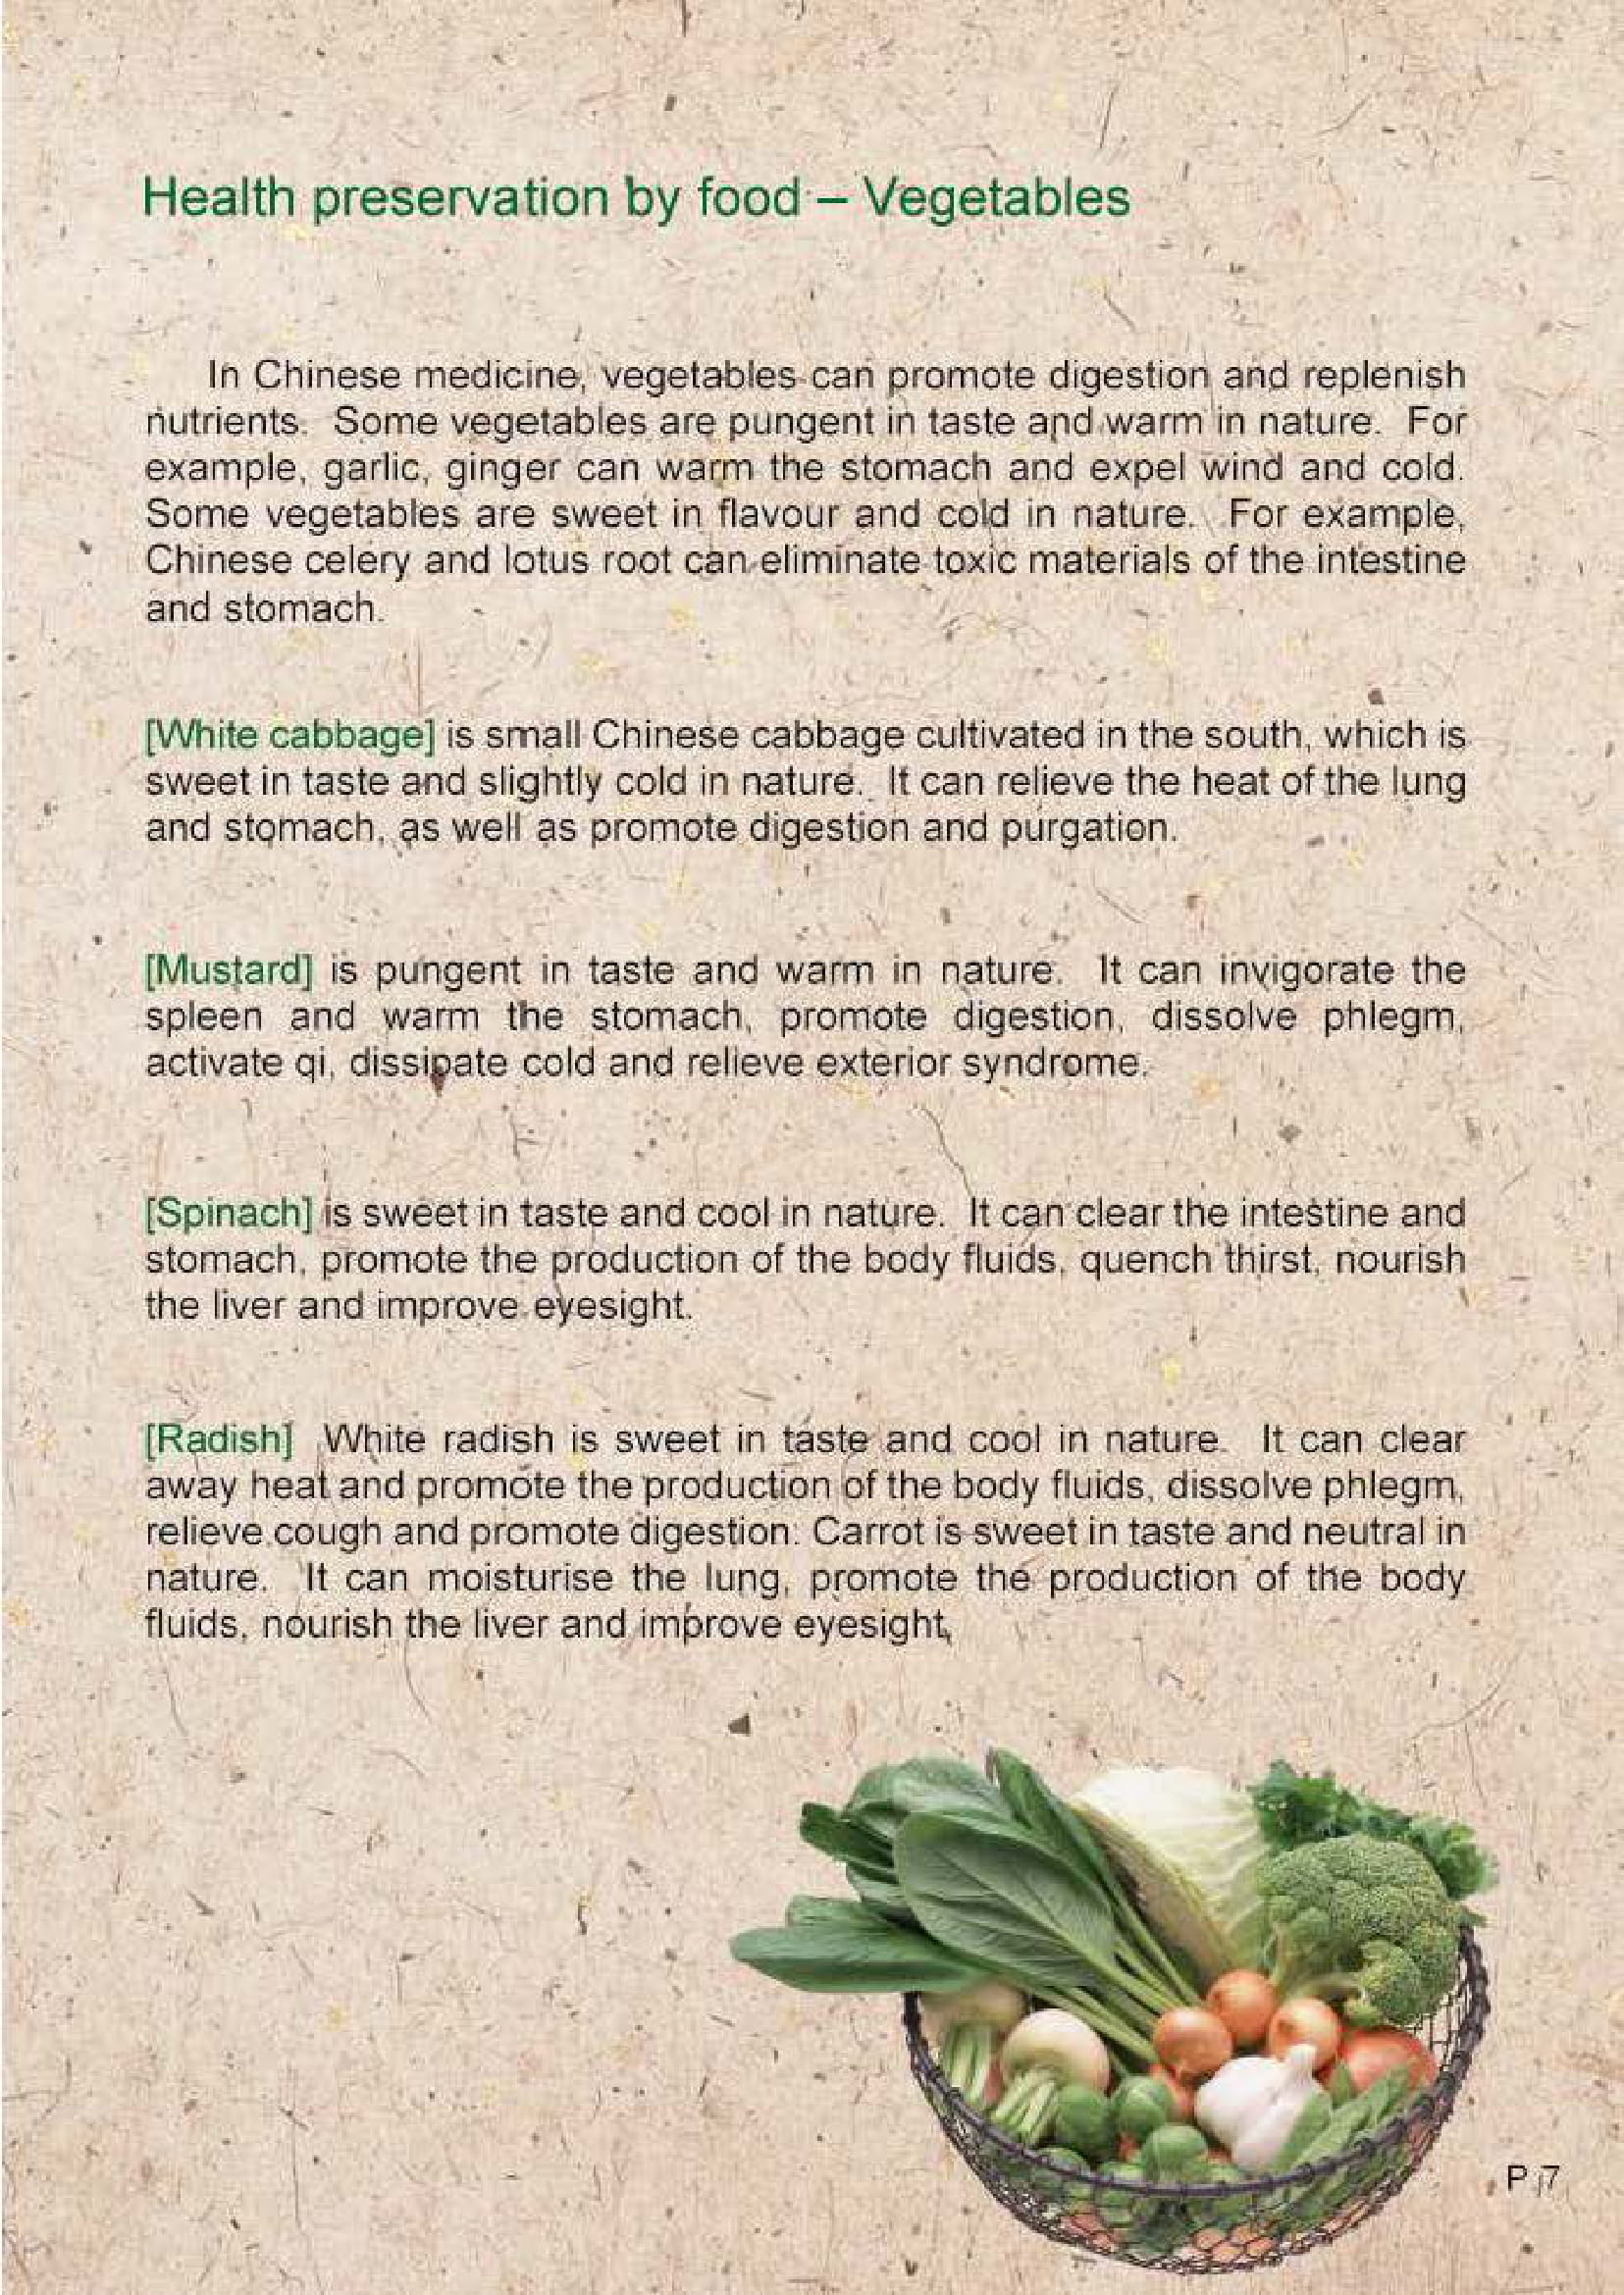 This picture demonstrates page 7 of the publication entitled "Health preservation by food in Chinese medicine – The five cereals, fruits and vegetables"